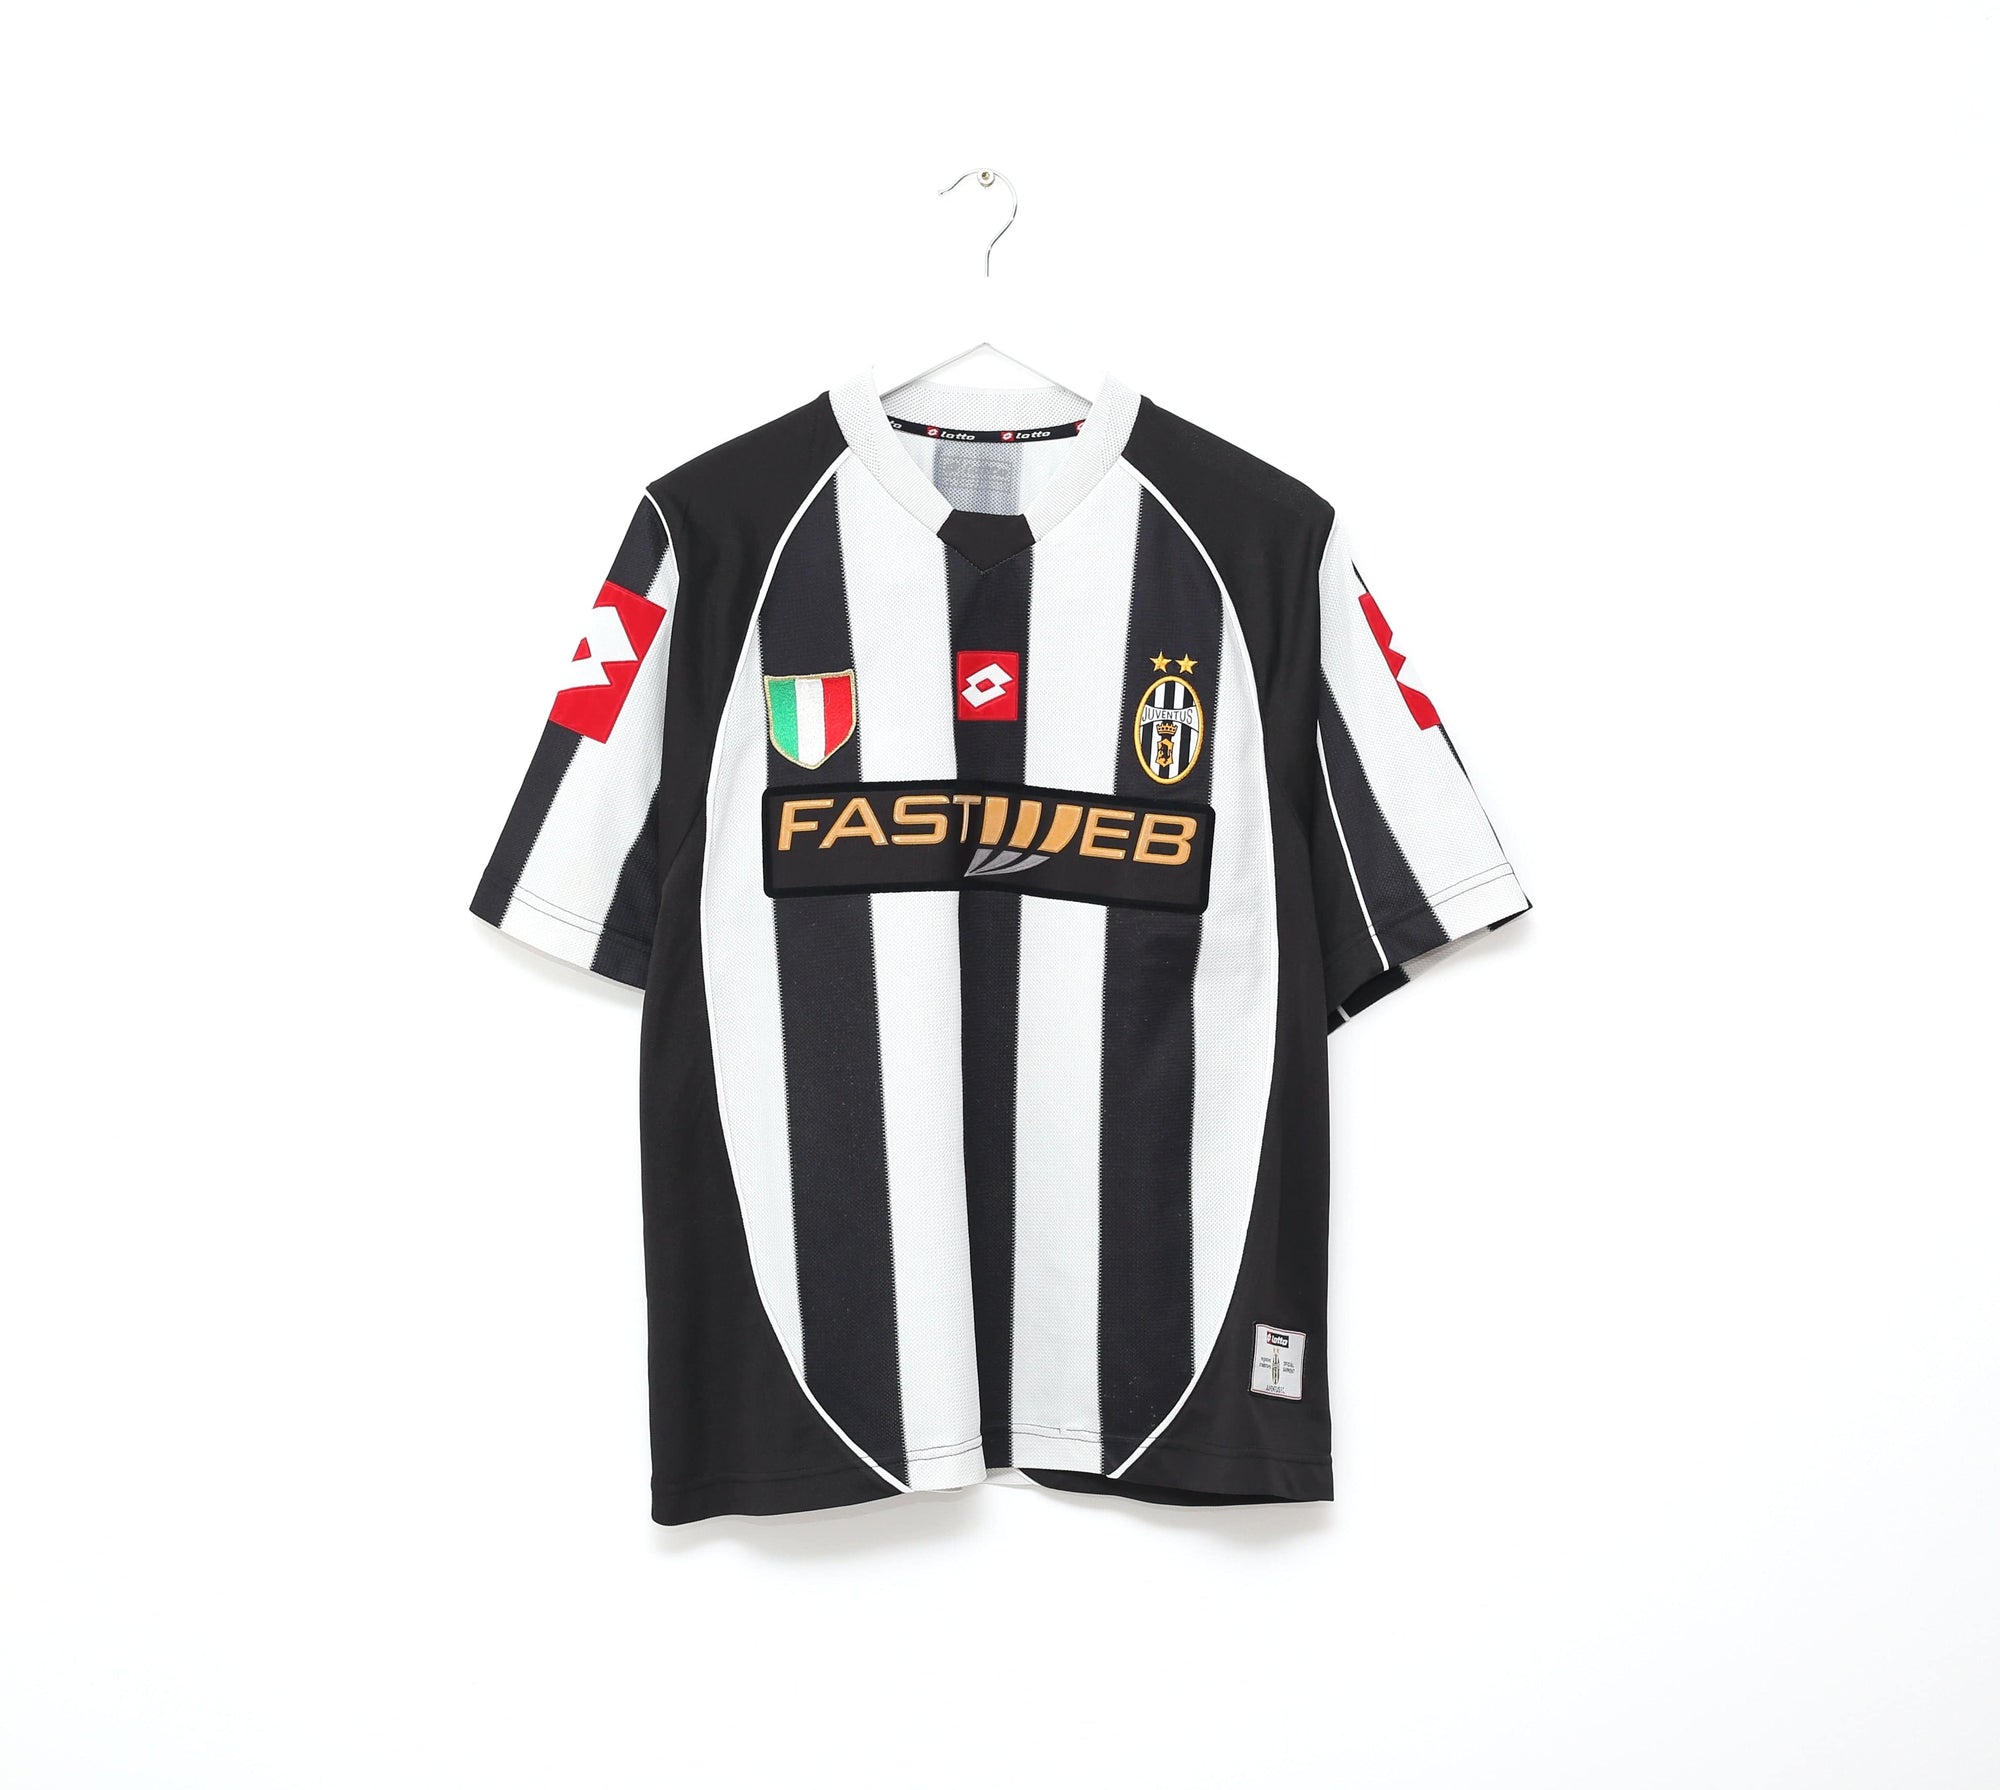 2002/03 CONTE #8 Juventus Vintage Lotto Home Football Shirt Jersey (L)